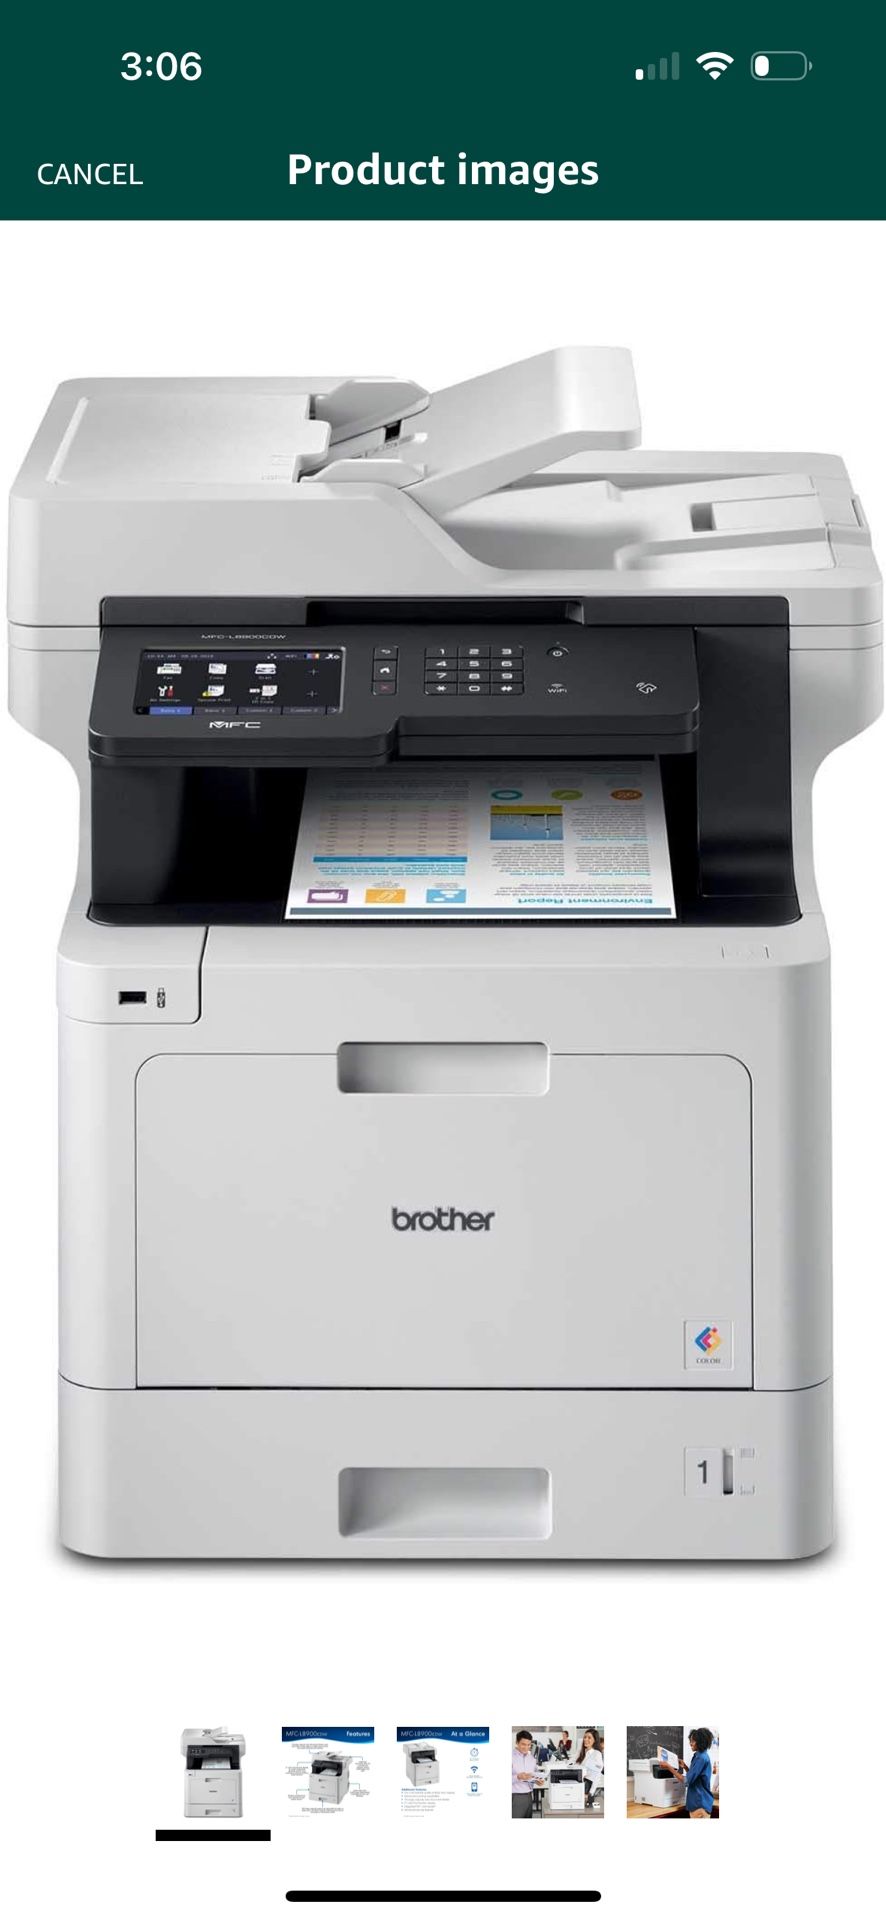 BROTHER Business Color Laser All-in-One Printer with Duplex Print, Scan, Copy and Wireless Networking